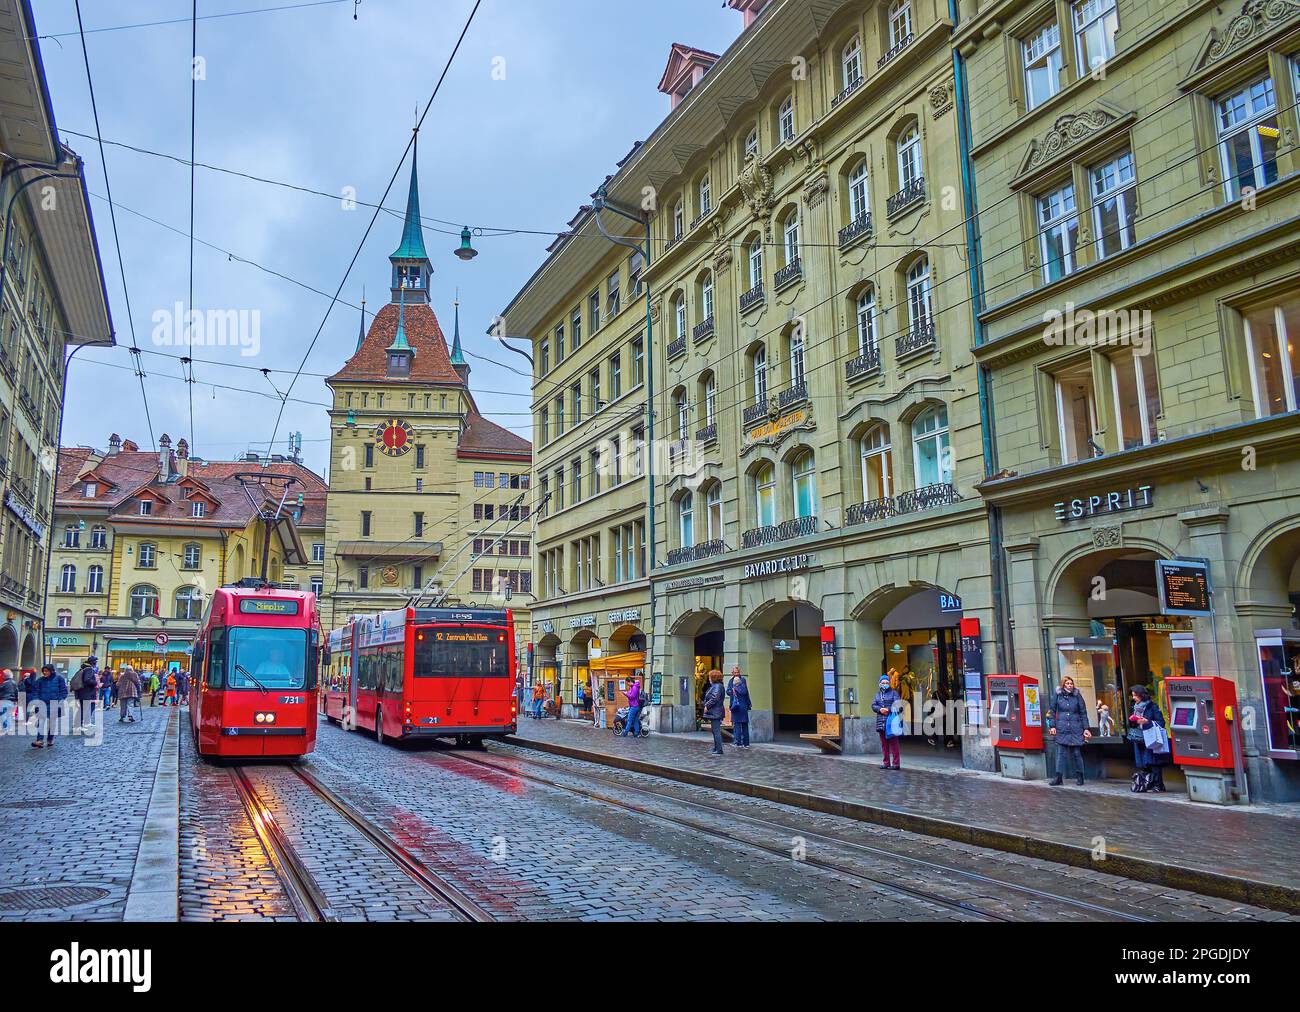 BERN, SWITZERLAND - MARCH 31, 2022: Public transport of Bern run along the main historical streets and swuzres of Altstadt district, on March 31 in Be Stock Photo